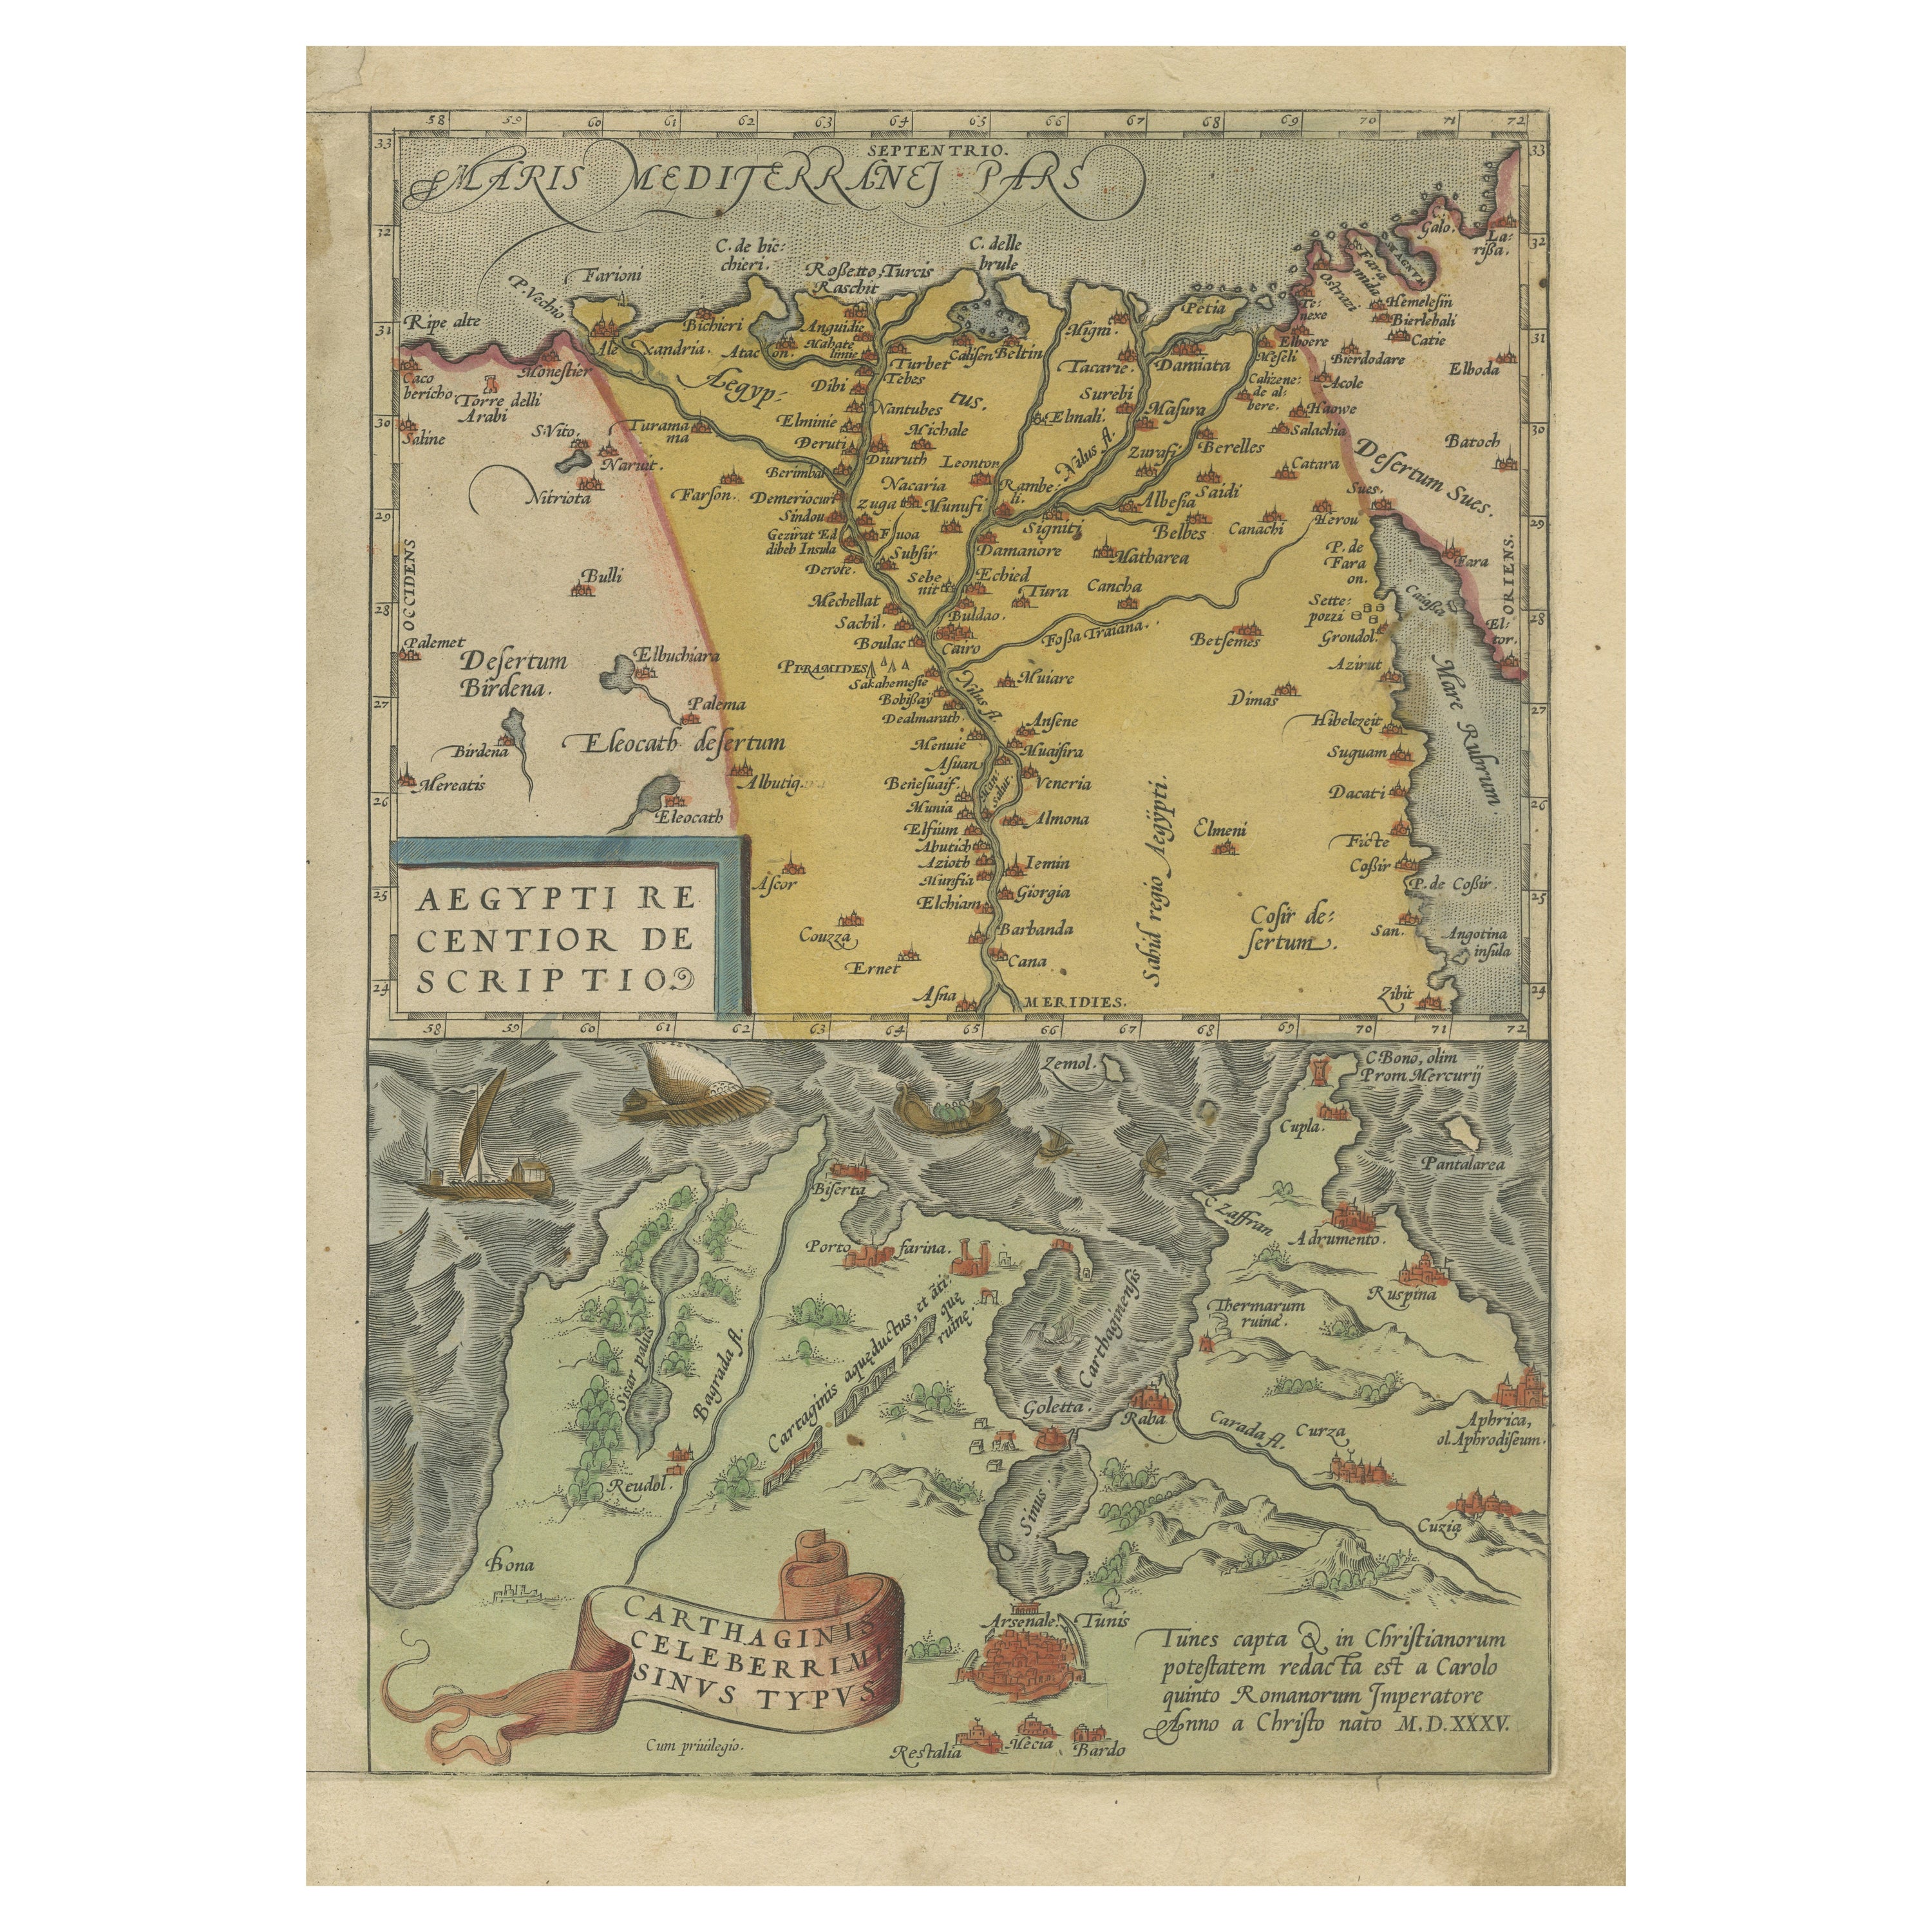 Antique Map of the Region Around the Nile and the City of Carthage